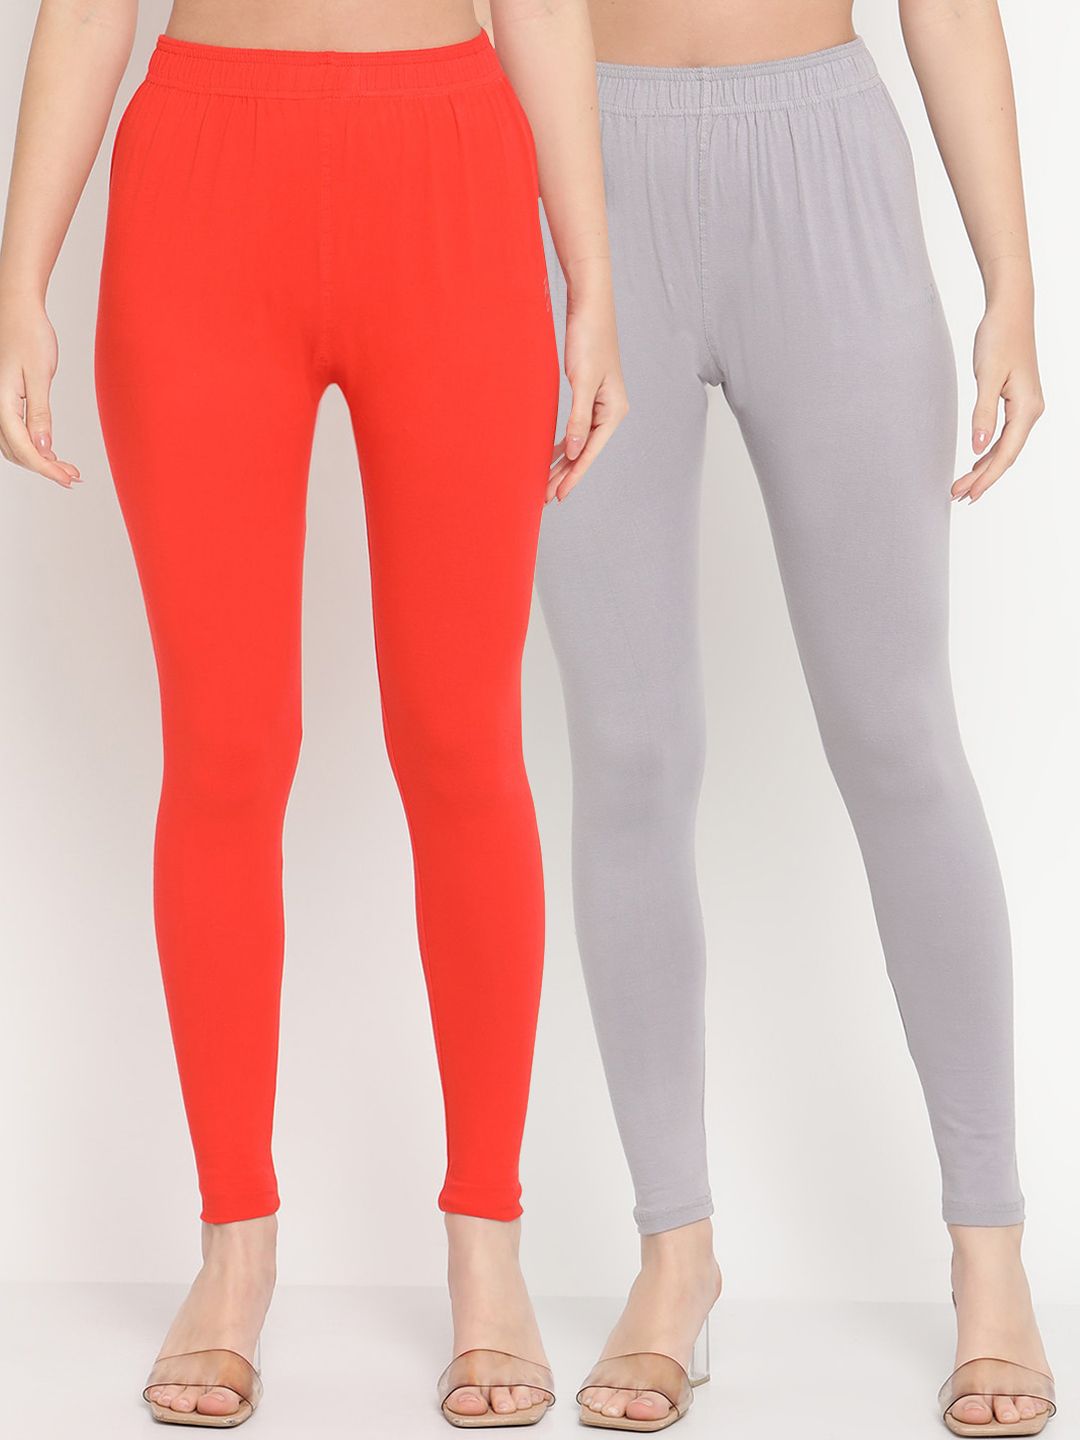 TAG 7 Women Pack Of 2 Orange & Grey Solid Comfort Fit Ankle-Length Leggings Price in India